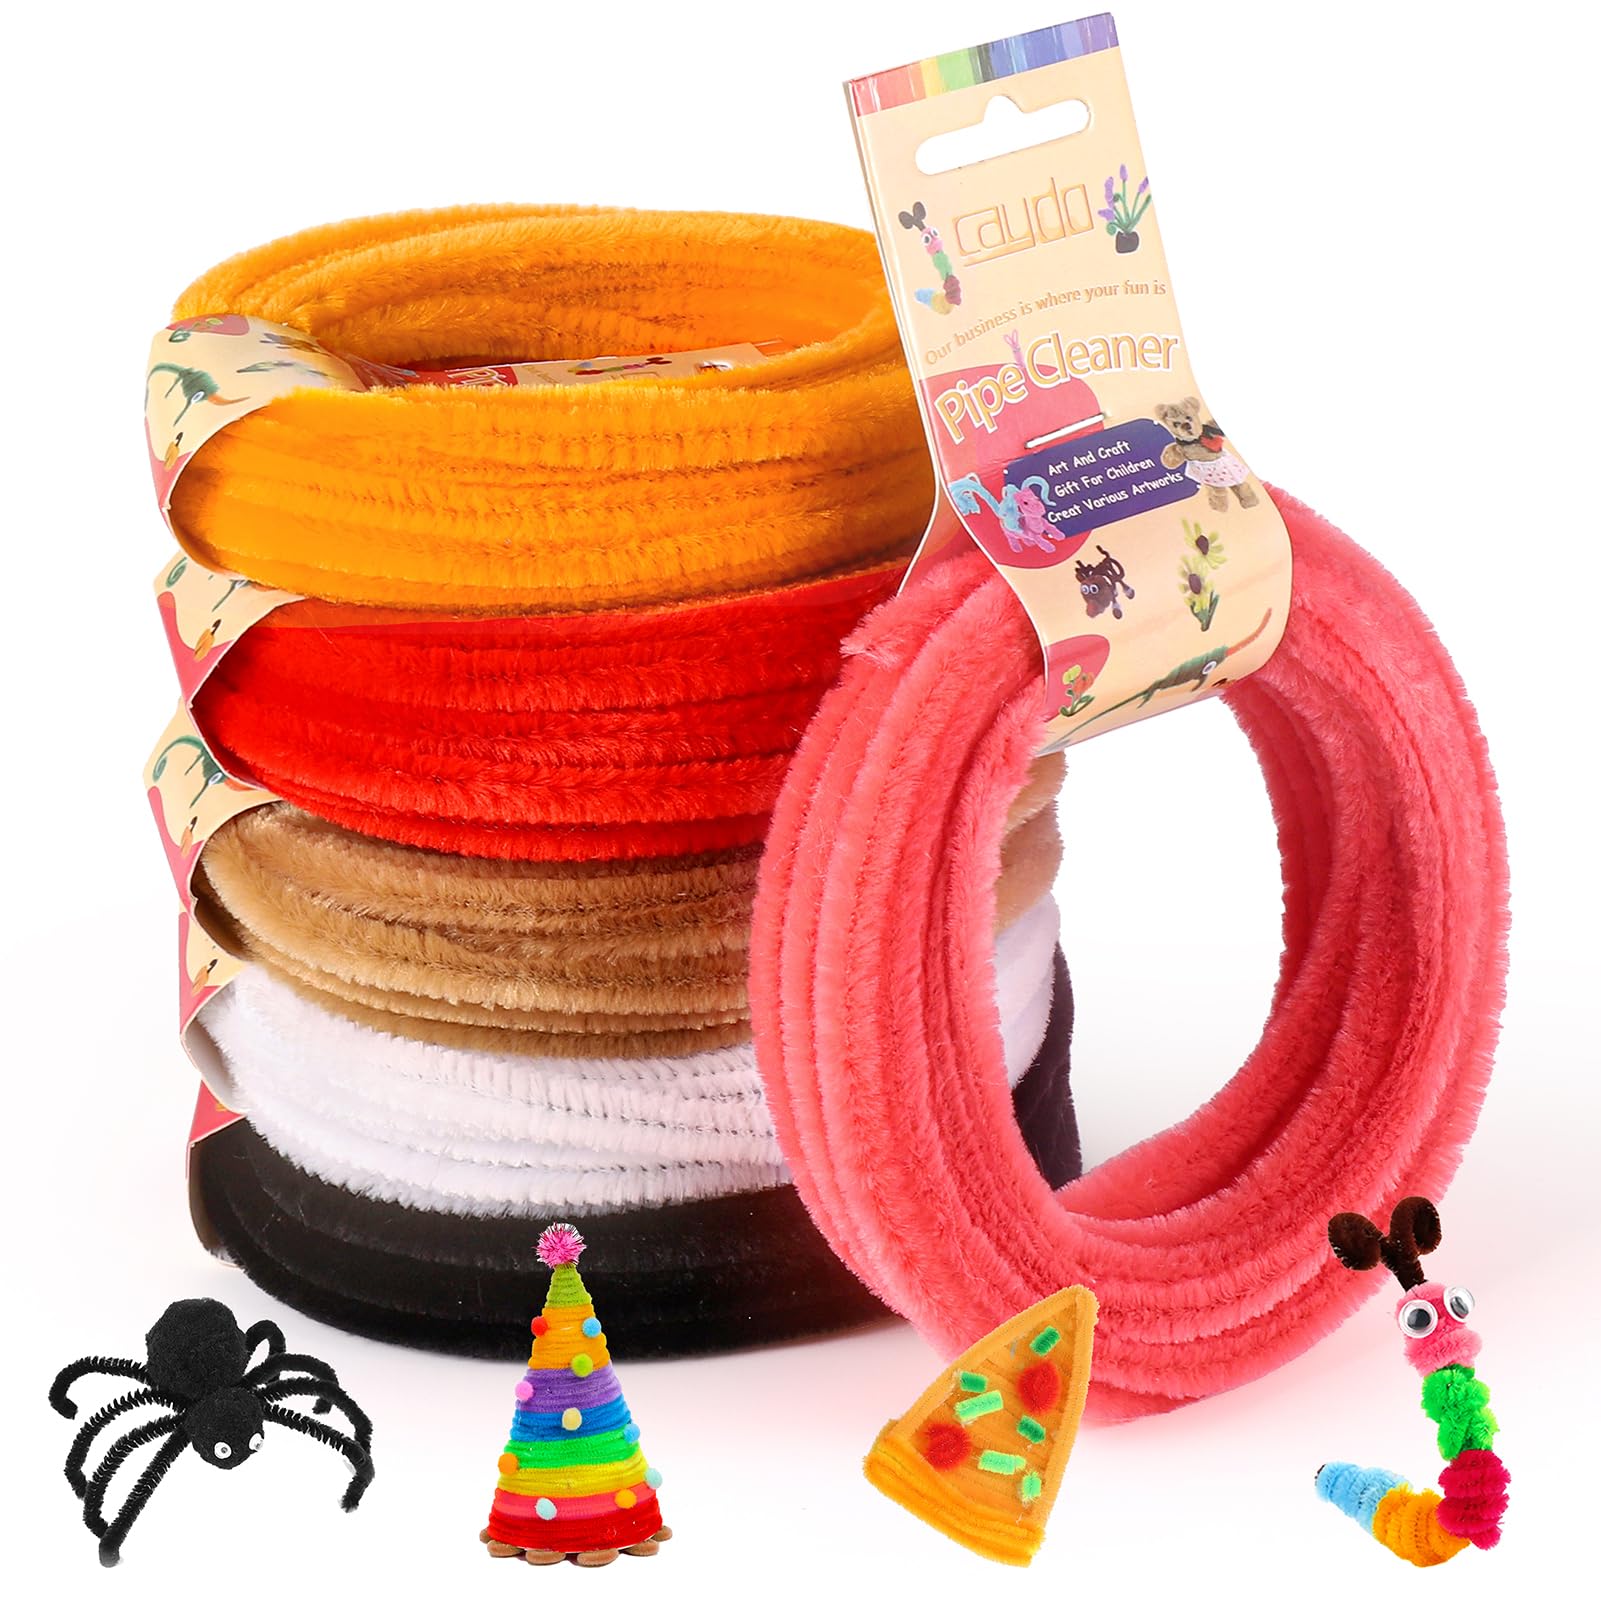 200pcs 20 colors Weaving Strings PVC Lacing String Craft String Multi-color  DIY Craft Cord Jewelry Making Rope 